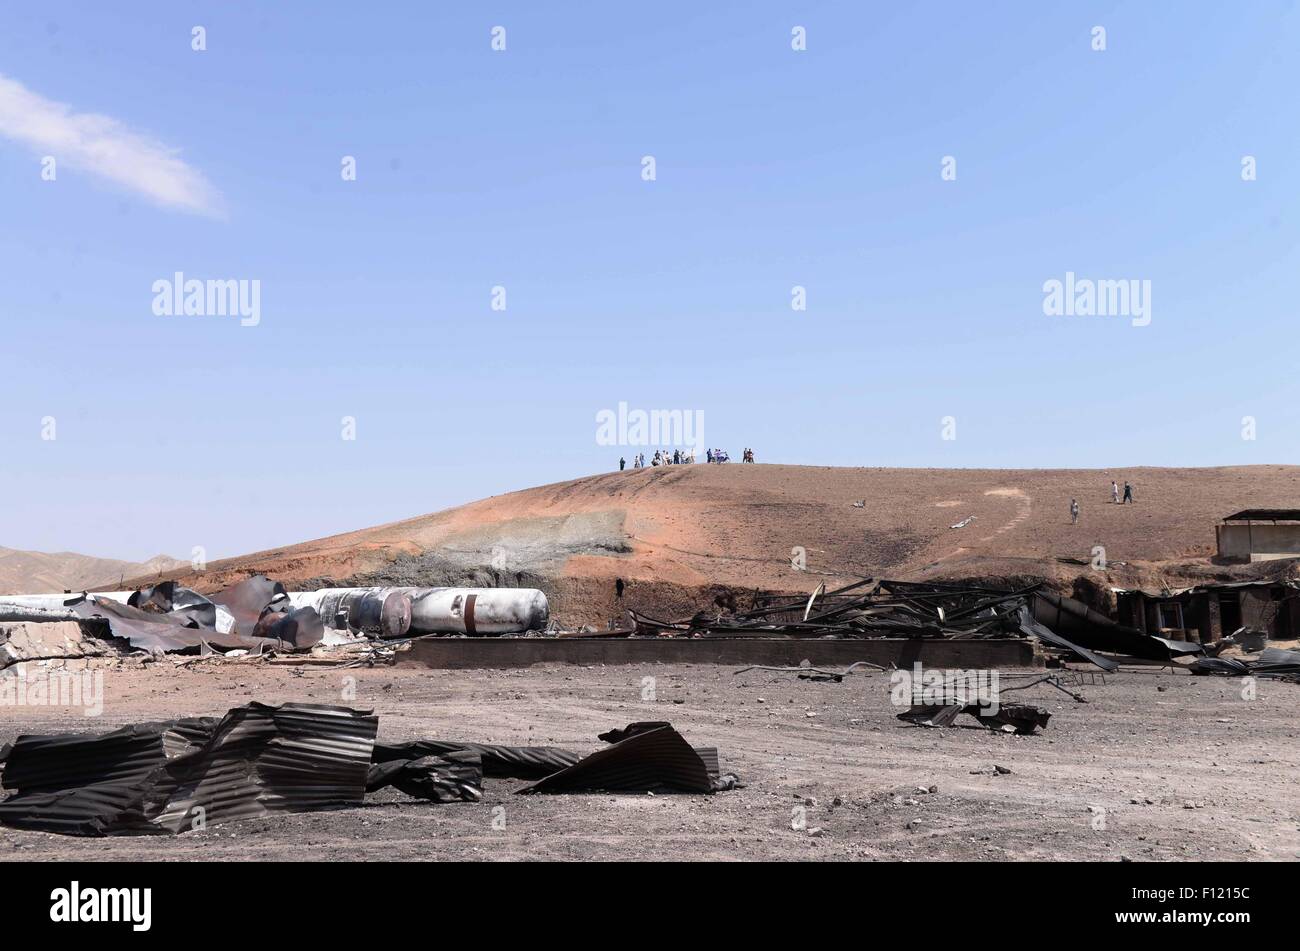 (150825) -- HERAT, Aug. 25, 2015 (Xinhua) -- Photo taken on Aug. 25, 2015 shows destroyed gas tankers after an explosion in Herat province, western Afghanistan. At least 11 people were killed while 18 others wounded after a reservoir of liquefied gas caught fire in Herat city, capital of western Afghanistan's Herat province overnight Monday, sources said on Tuesday. (Xinhua/Sardar) Stock Photo